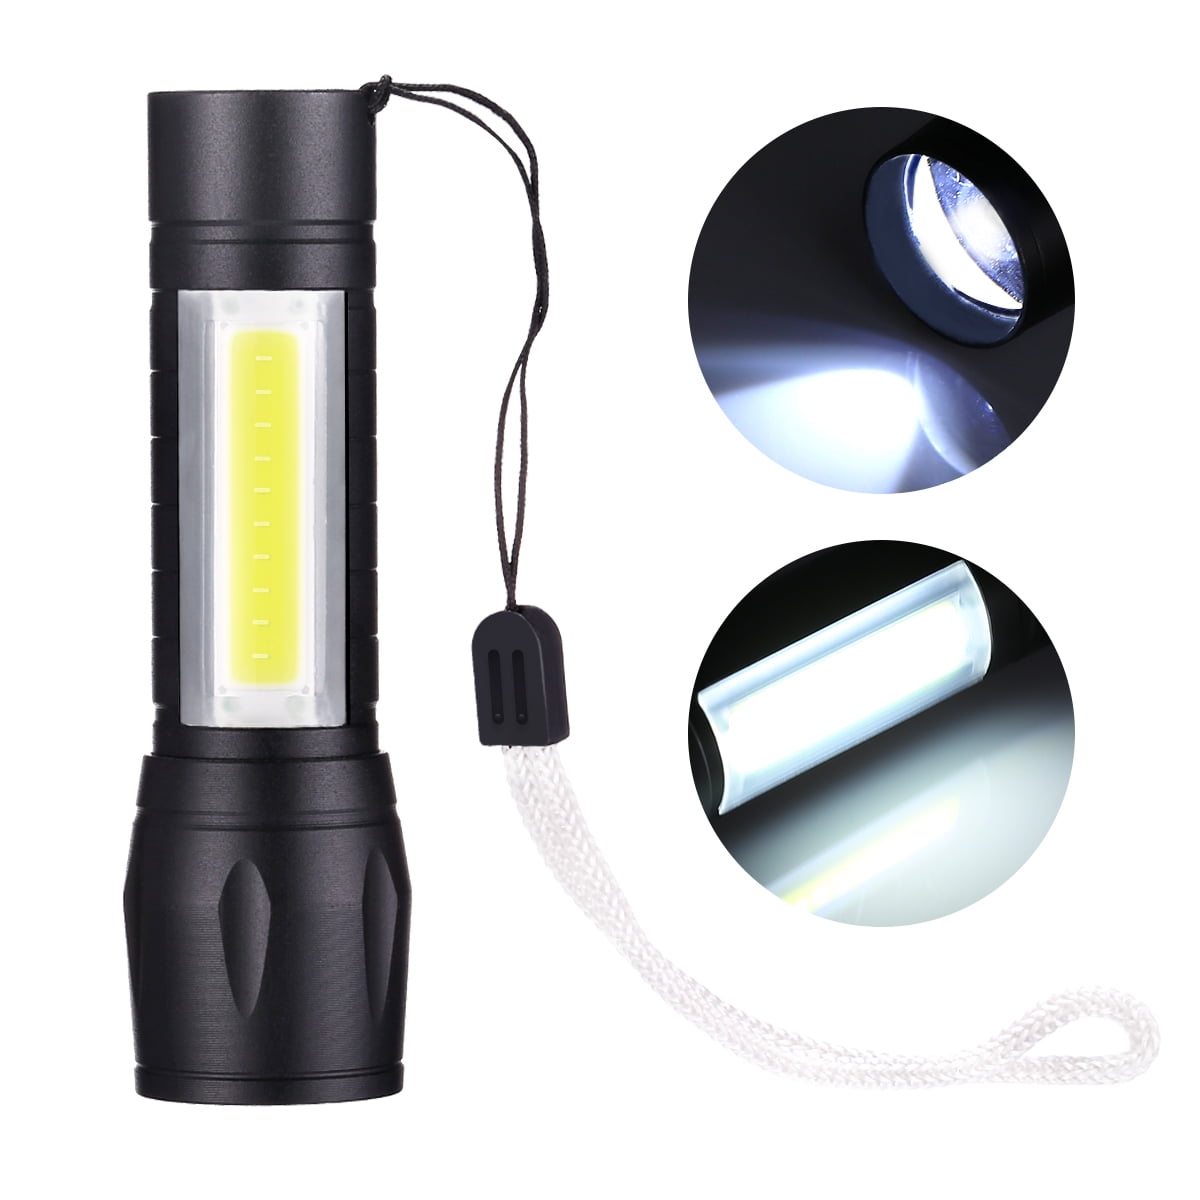 3 Modes Mini Portable Flashlight Torch Zoomable Outdoor Camping Hiking Light 